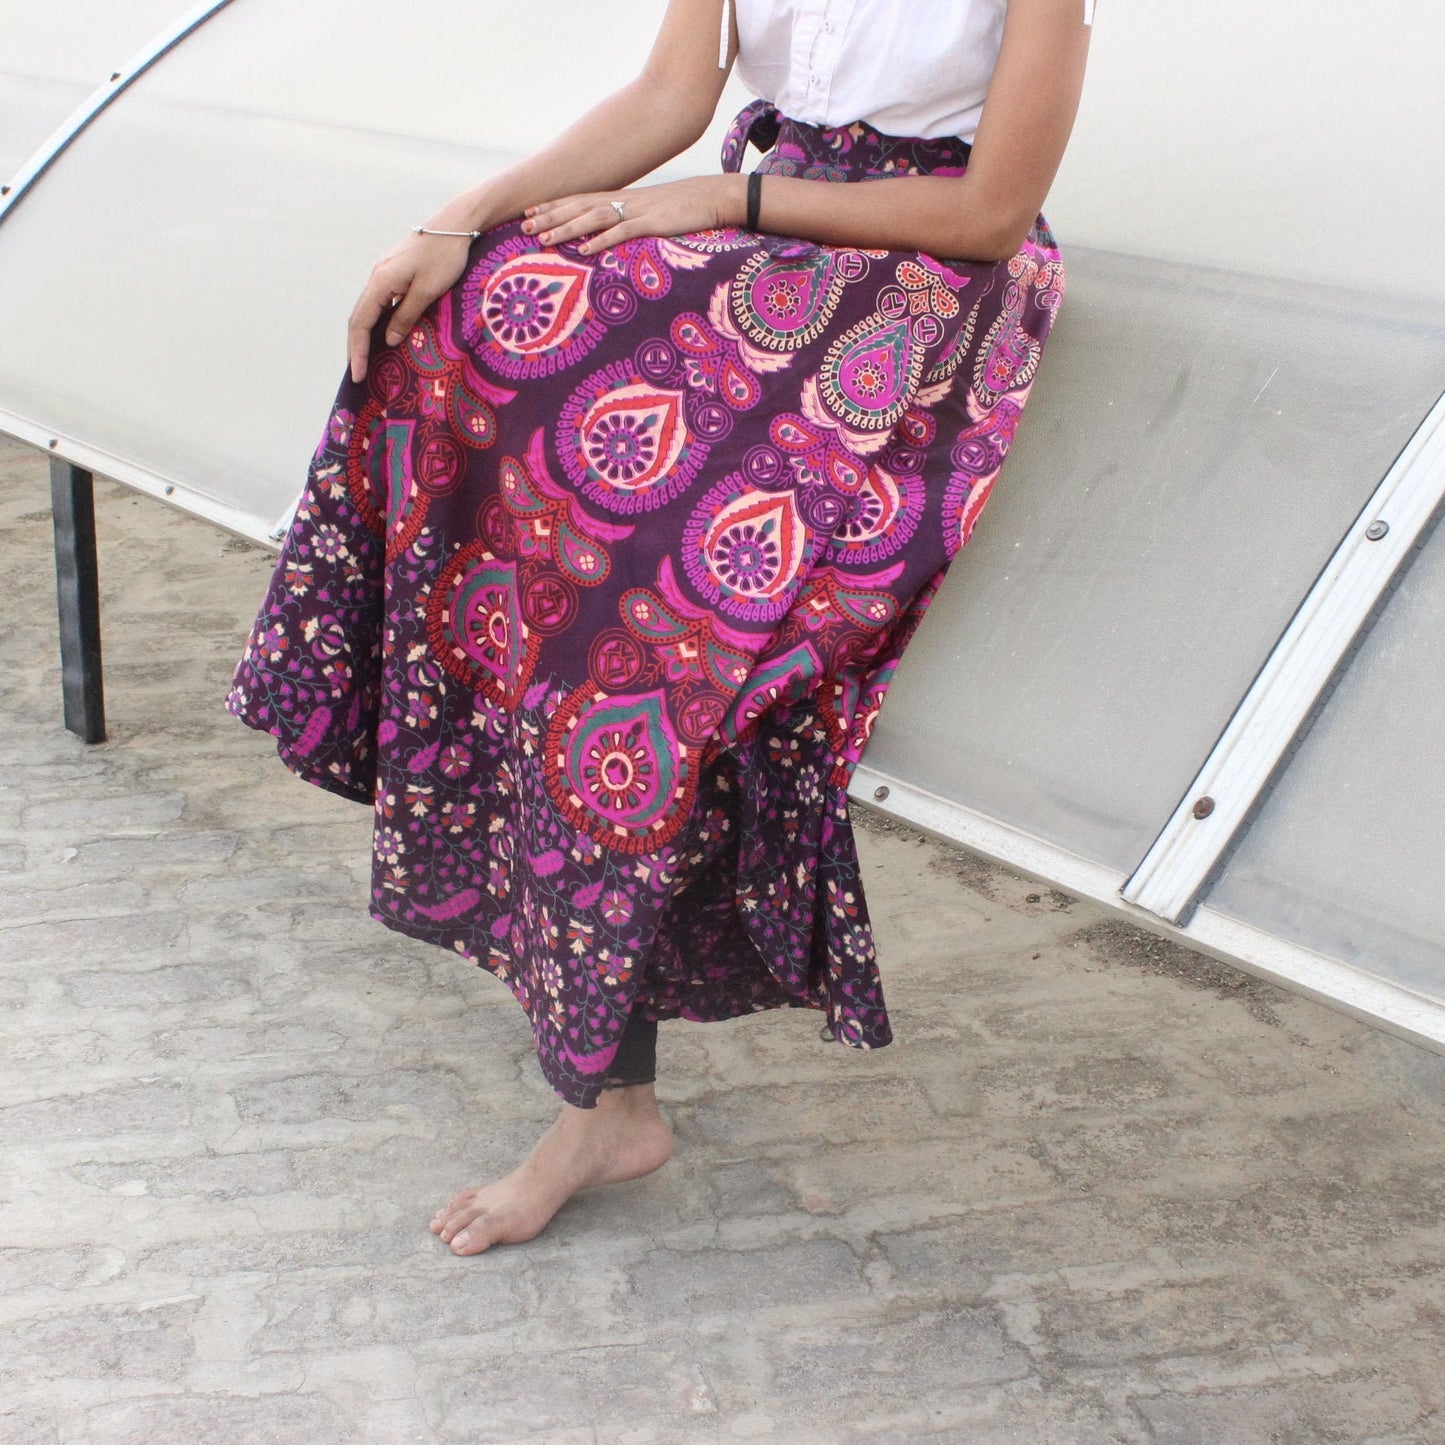 Handmade Festival Skirt Home Outfit Hippie Skirt Fairy Skirt Touch of Boho-Chic to Your Wardrobe with this Gypsy-Inspired Clothing Skirt